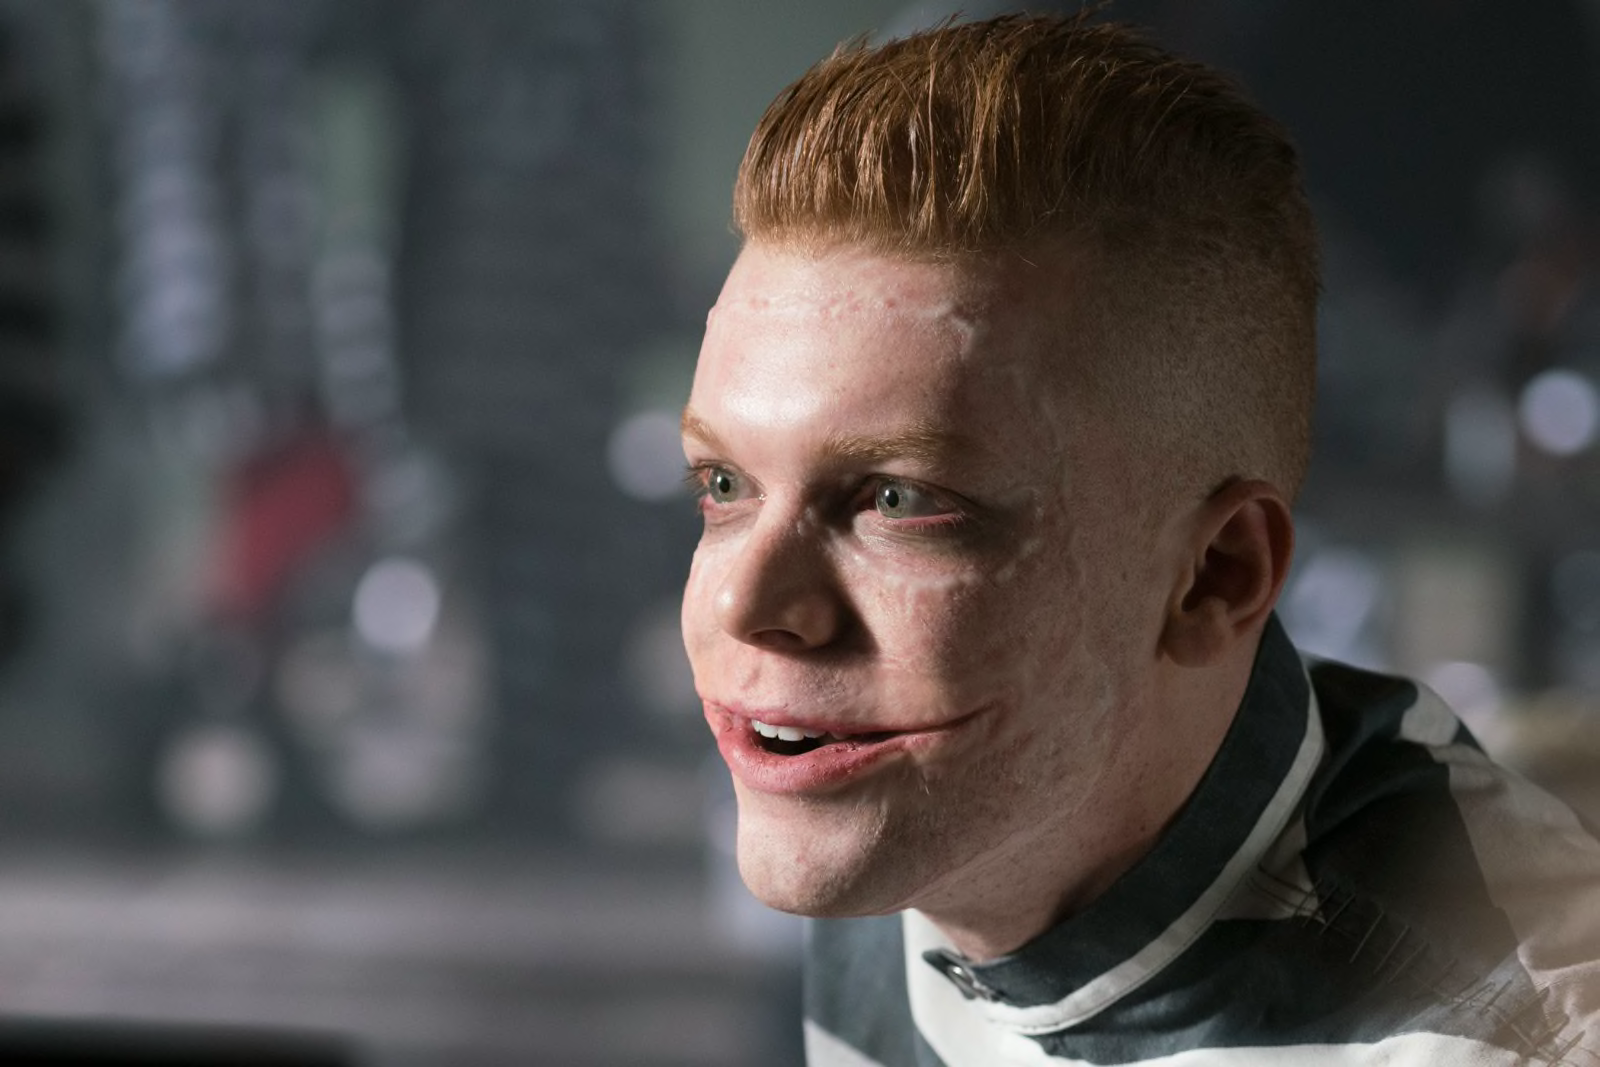 Gotham Why Cameron Monaghan's Joker is one of the alltime greats